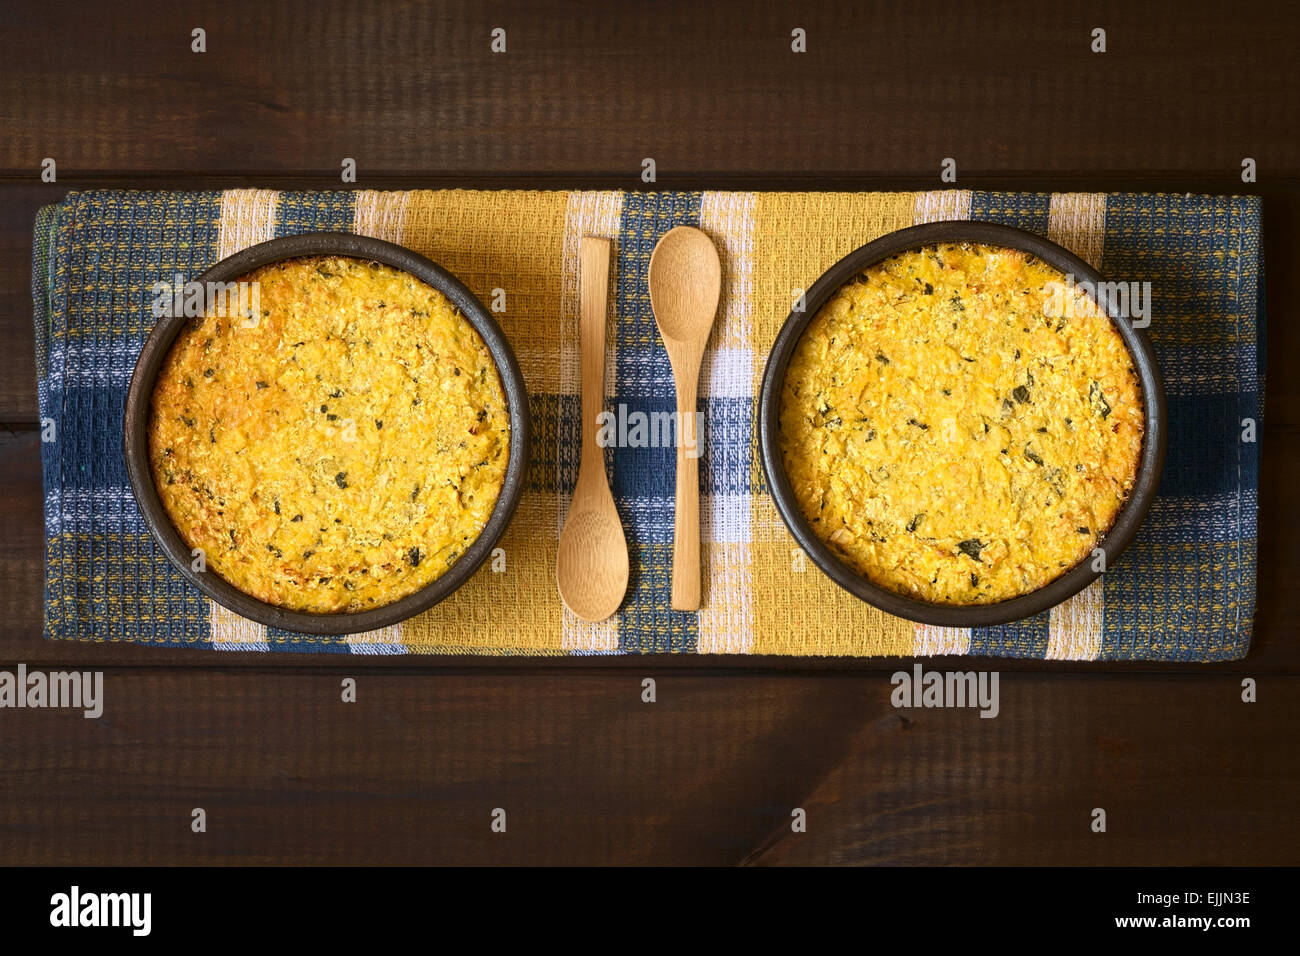 Overhead shot of traditional Chilean corn pie called Pastel de Choclo served in bowls, photographed on cloth on dark wood Stock Photo